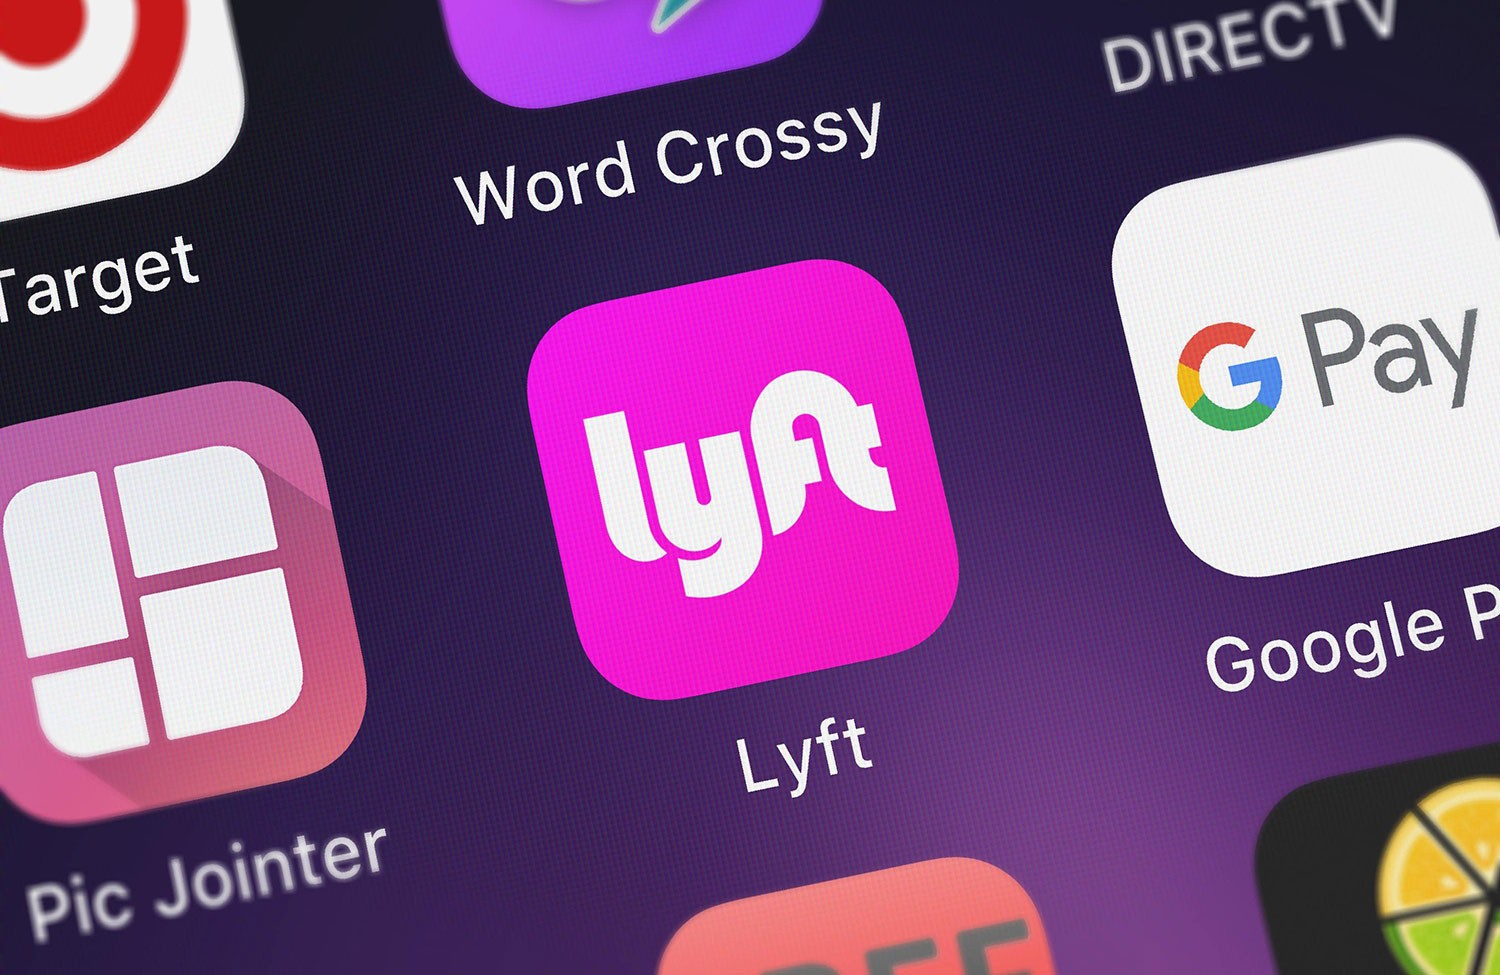 Earn Delta SkyMiles or Hilton Honors Points with Lyft Rides